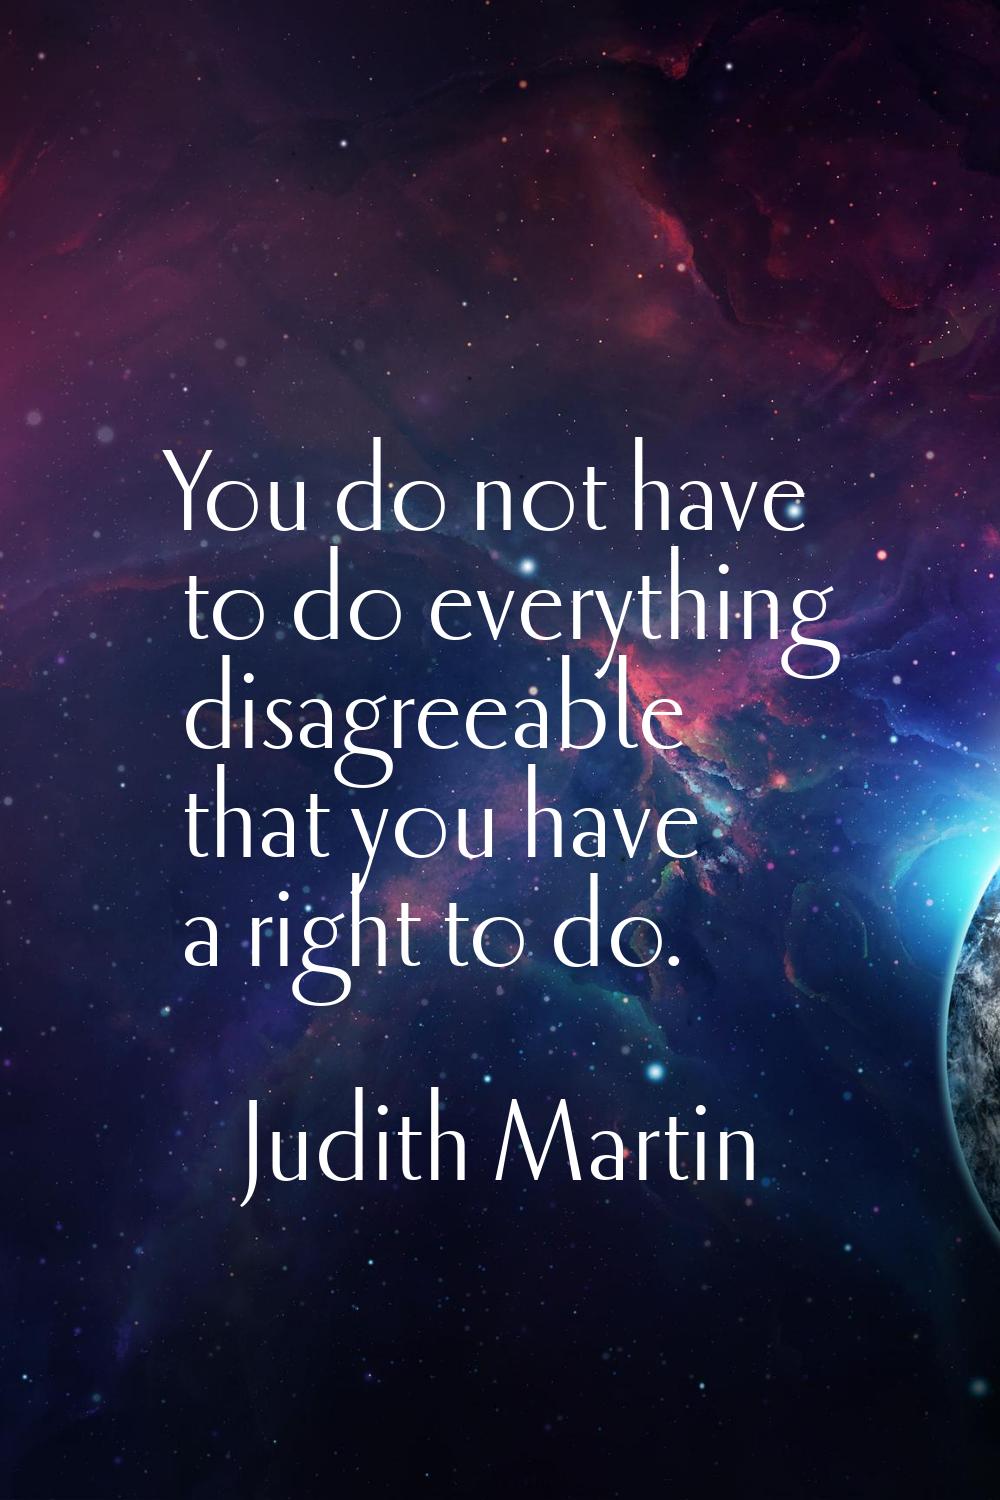 You do not have to do everything disagreeable that you have a right to do.